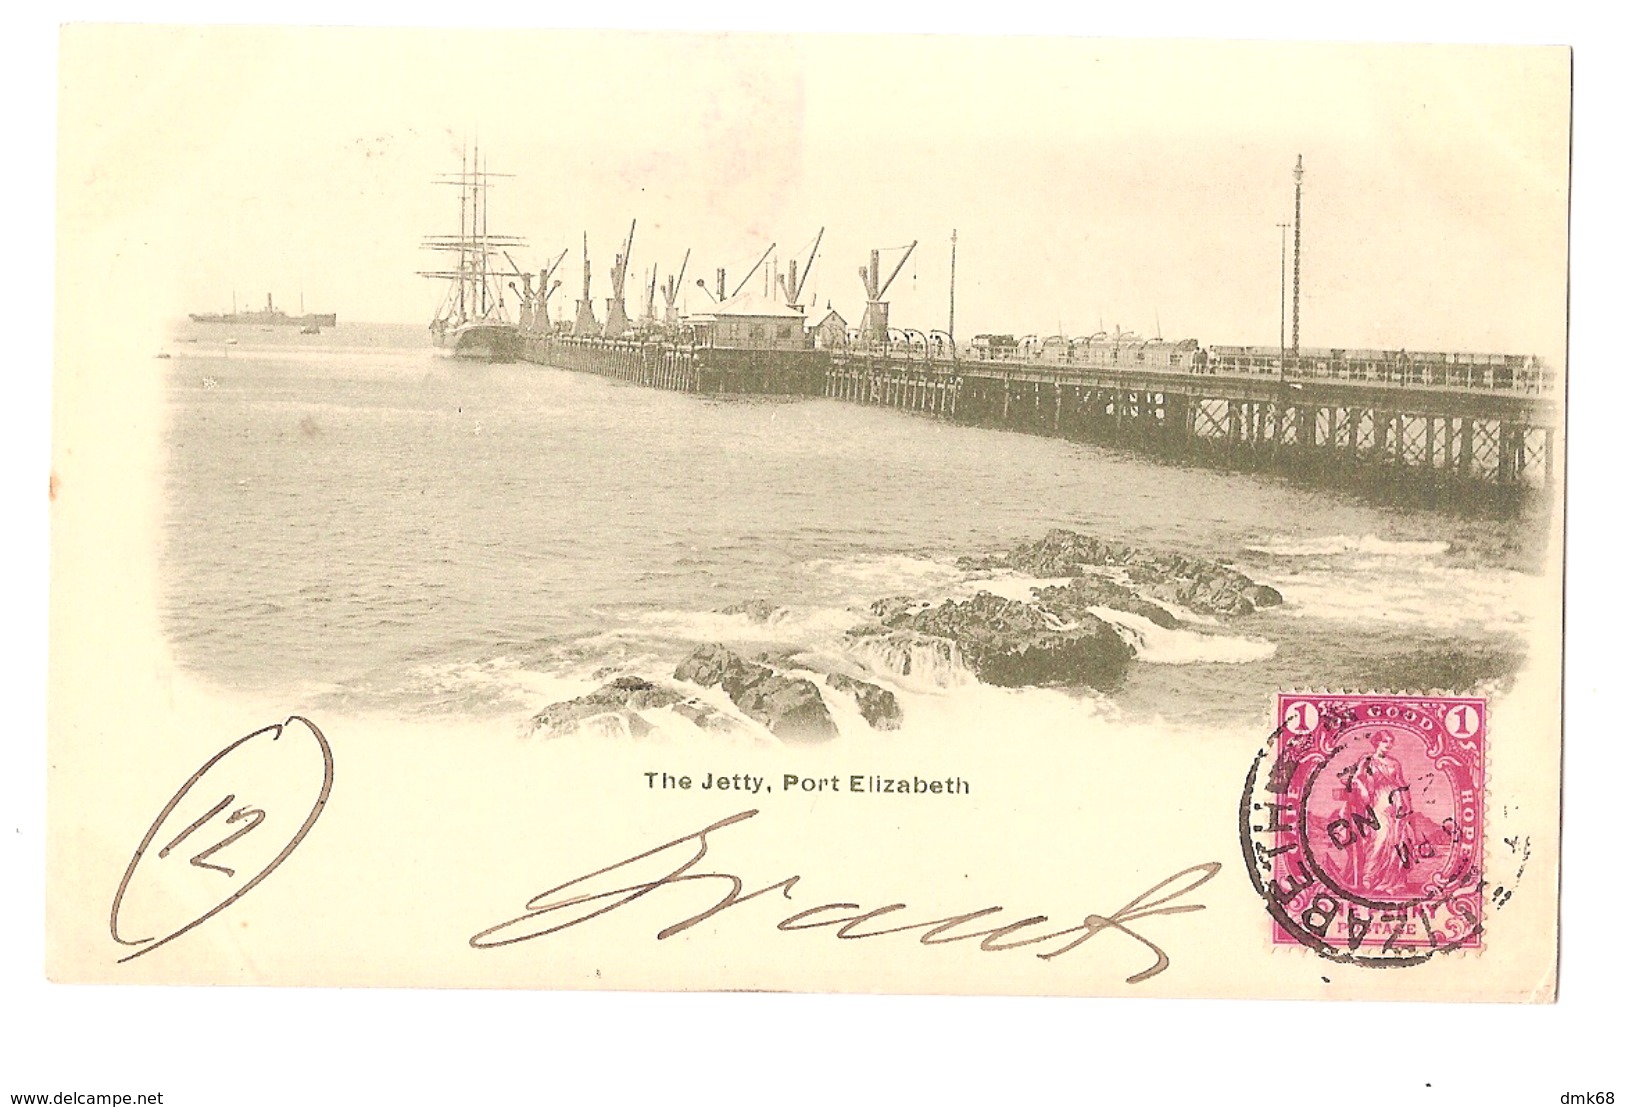 SOUTH AFRICA - PORT ELIZABETH -THE JETTY - STAMP - MAILED TO ITALY 1902 ( 2778) - South Africa